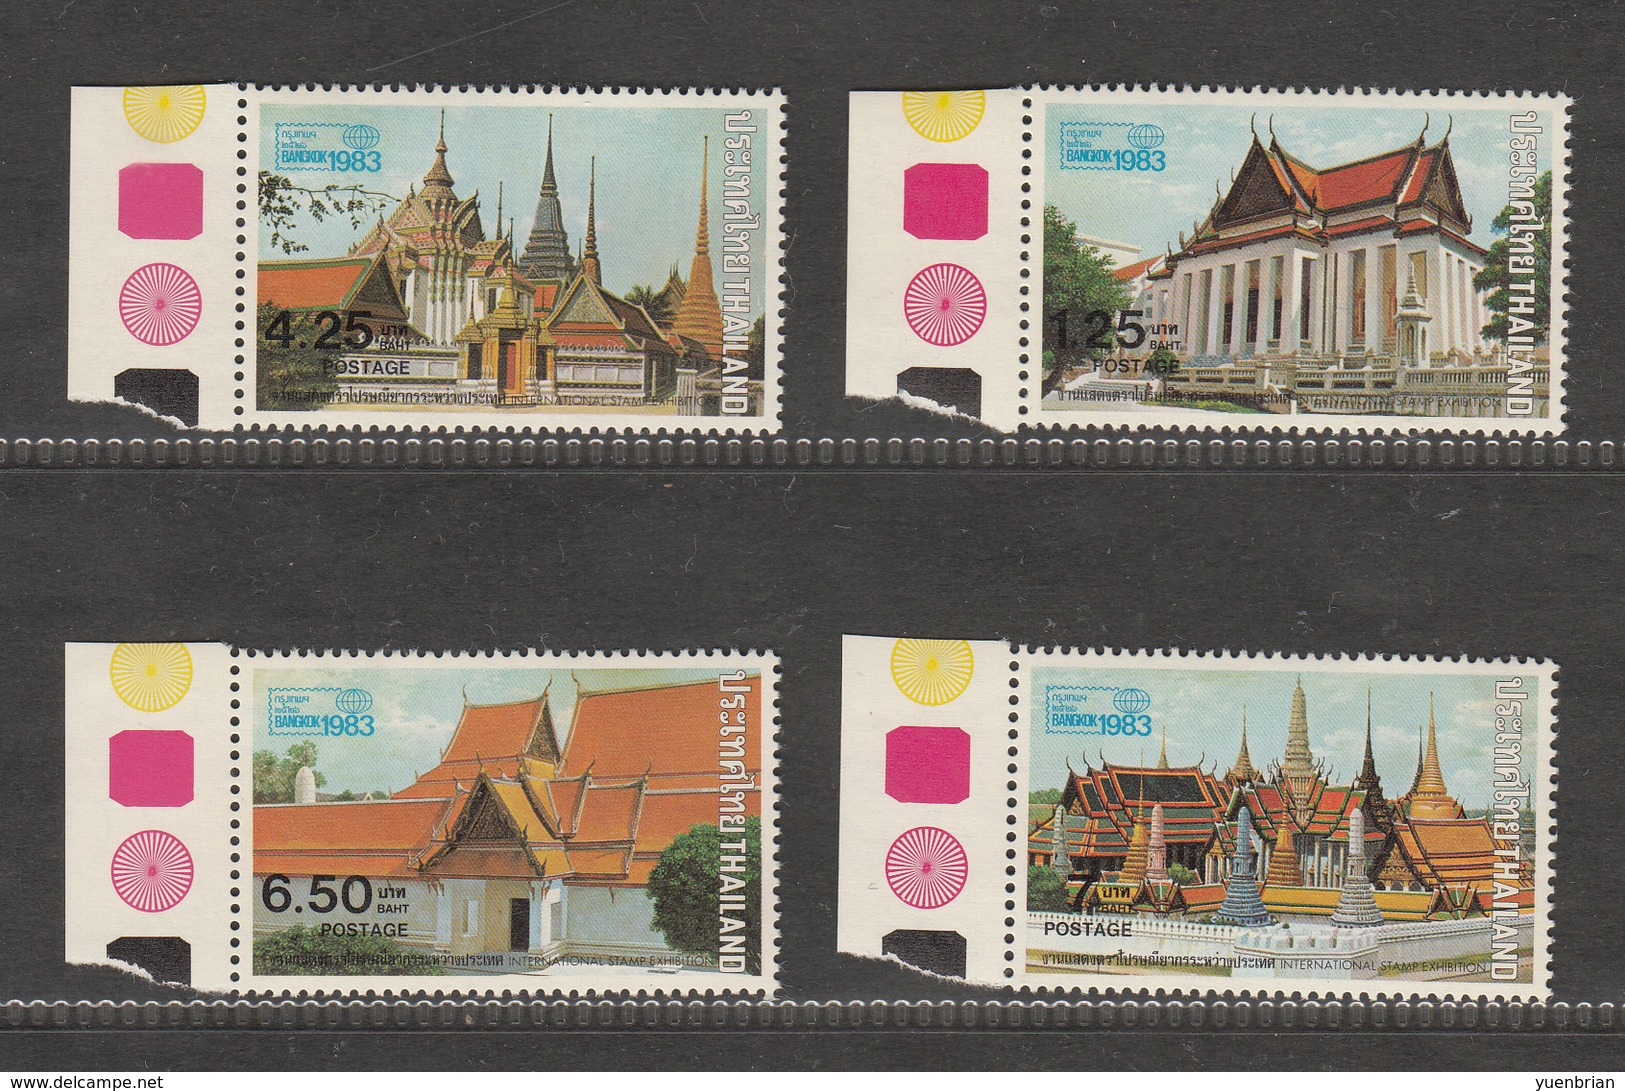 Thailand 1983 Bangkok Stamp Exhibition MNH**, Good Condition, Kept In De-humidity Cabinet Since Purchased! - Thailand